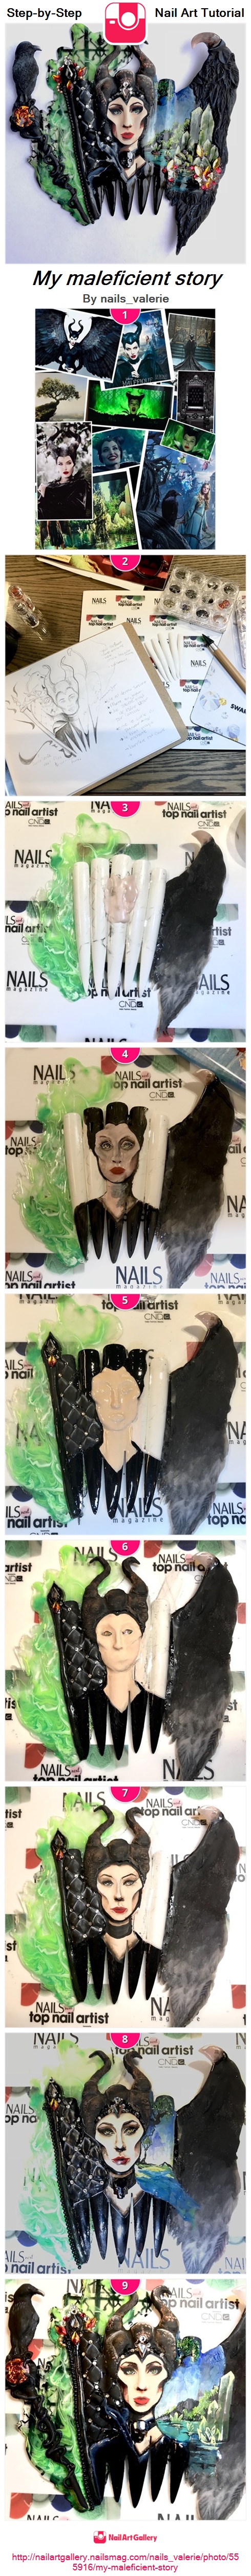 My maleficient story - Nail Art Gallery